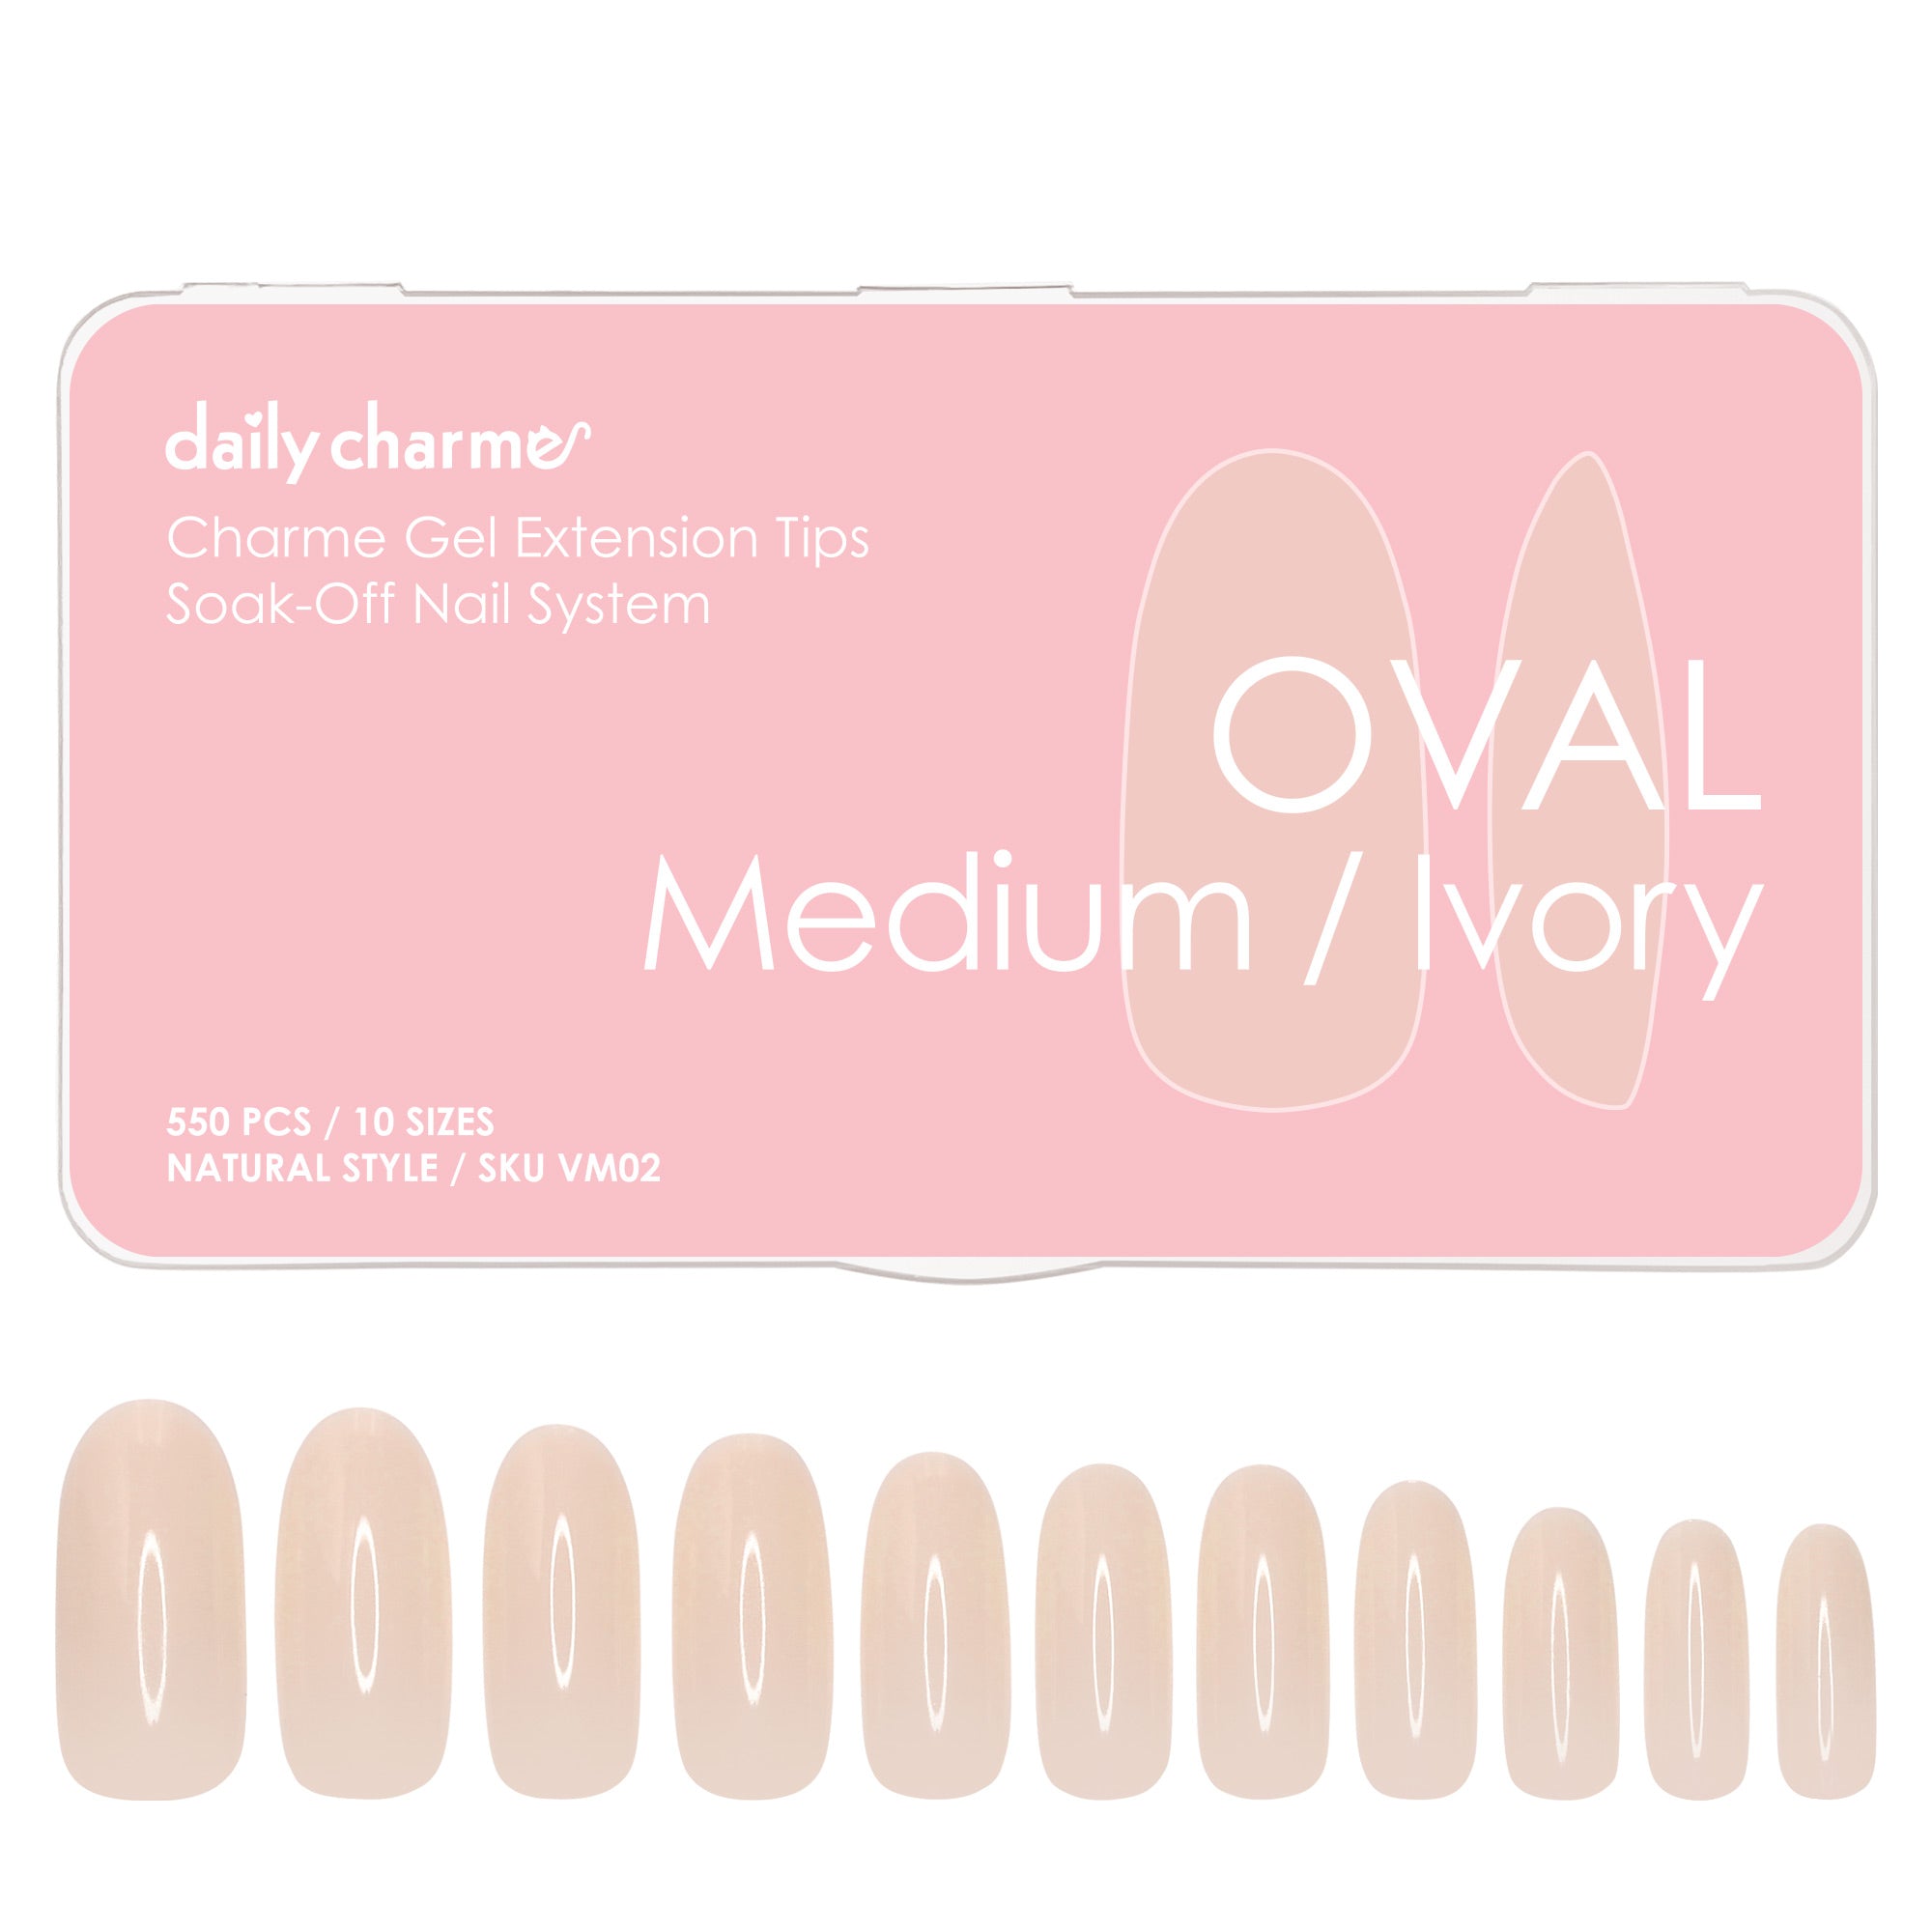 Charme Gel Extension Tips / Oval / Medium / Ivory Nail